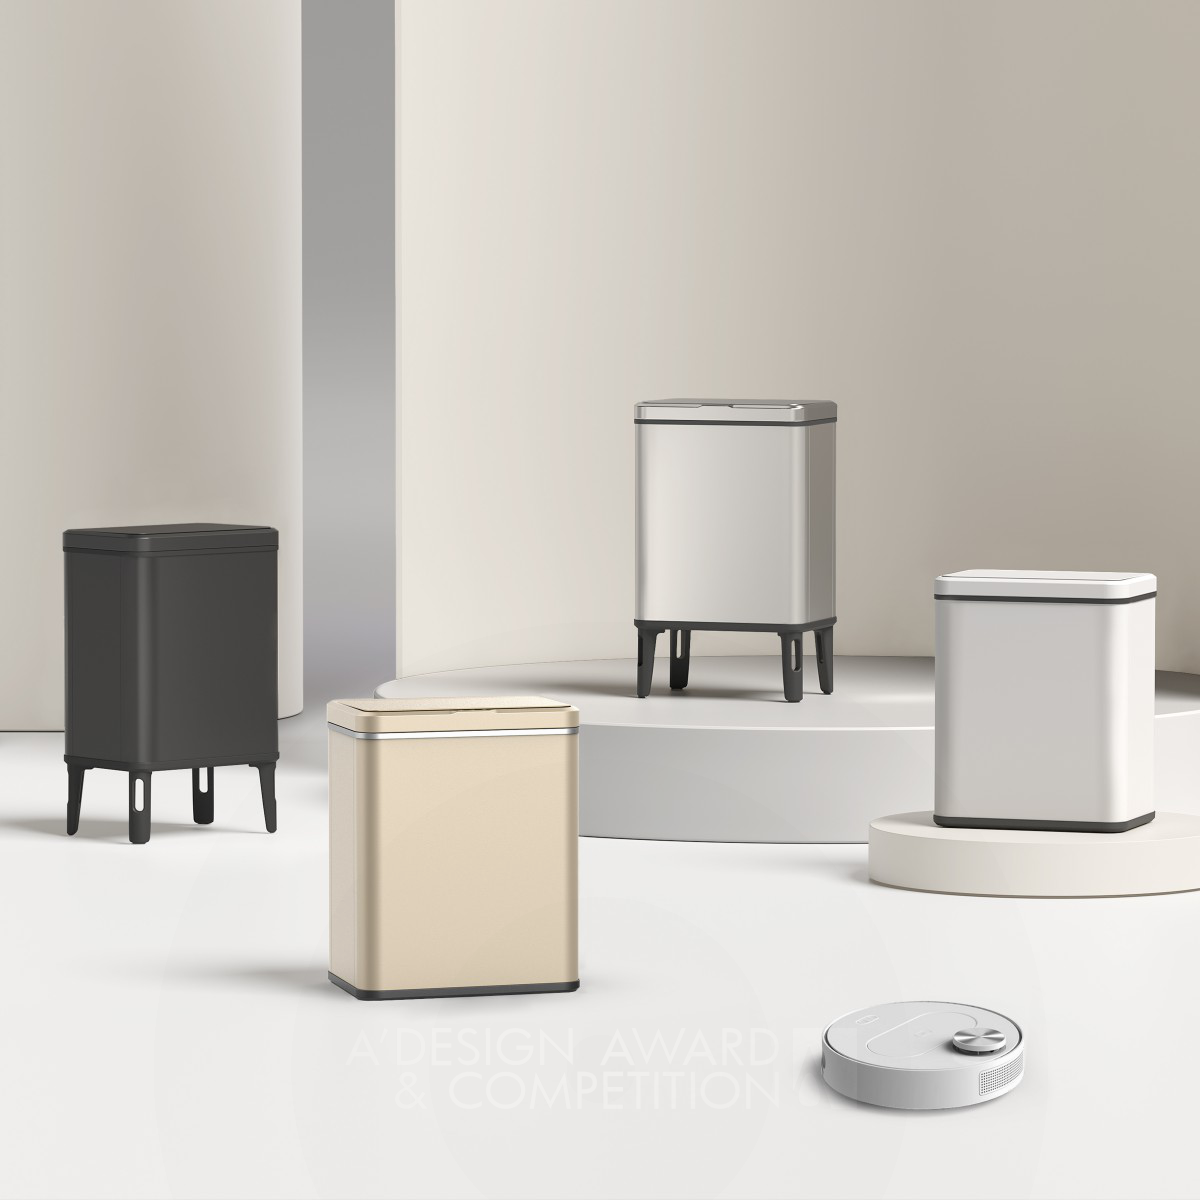 Ziel Home Furnishing Technology Co., Ltd wins Iron at the prestigious A' Furniture Design Award with Snapfit Detachable Trash Can.